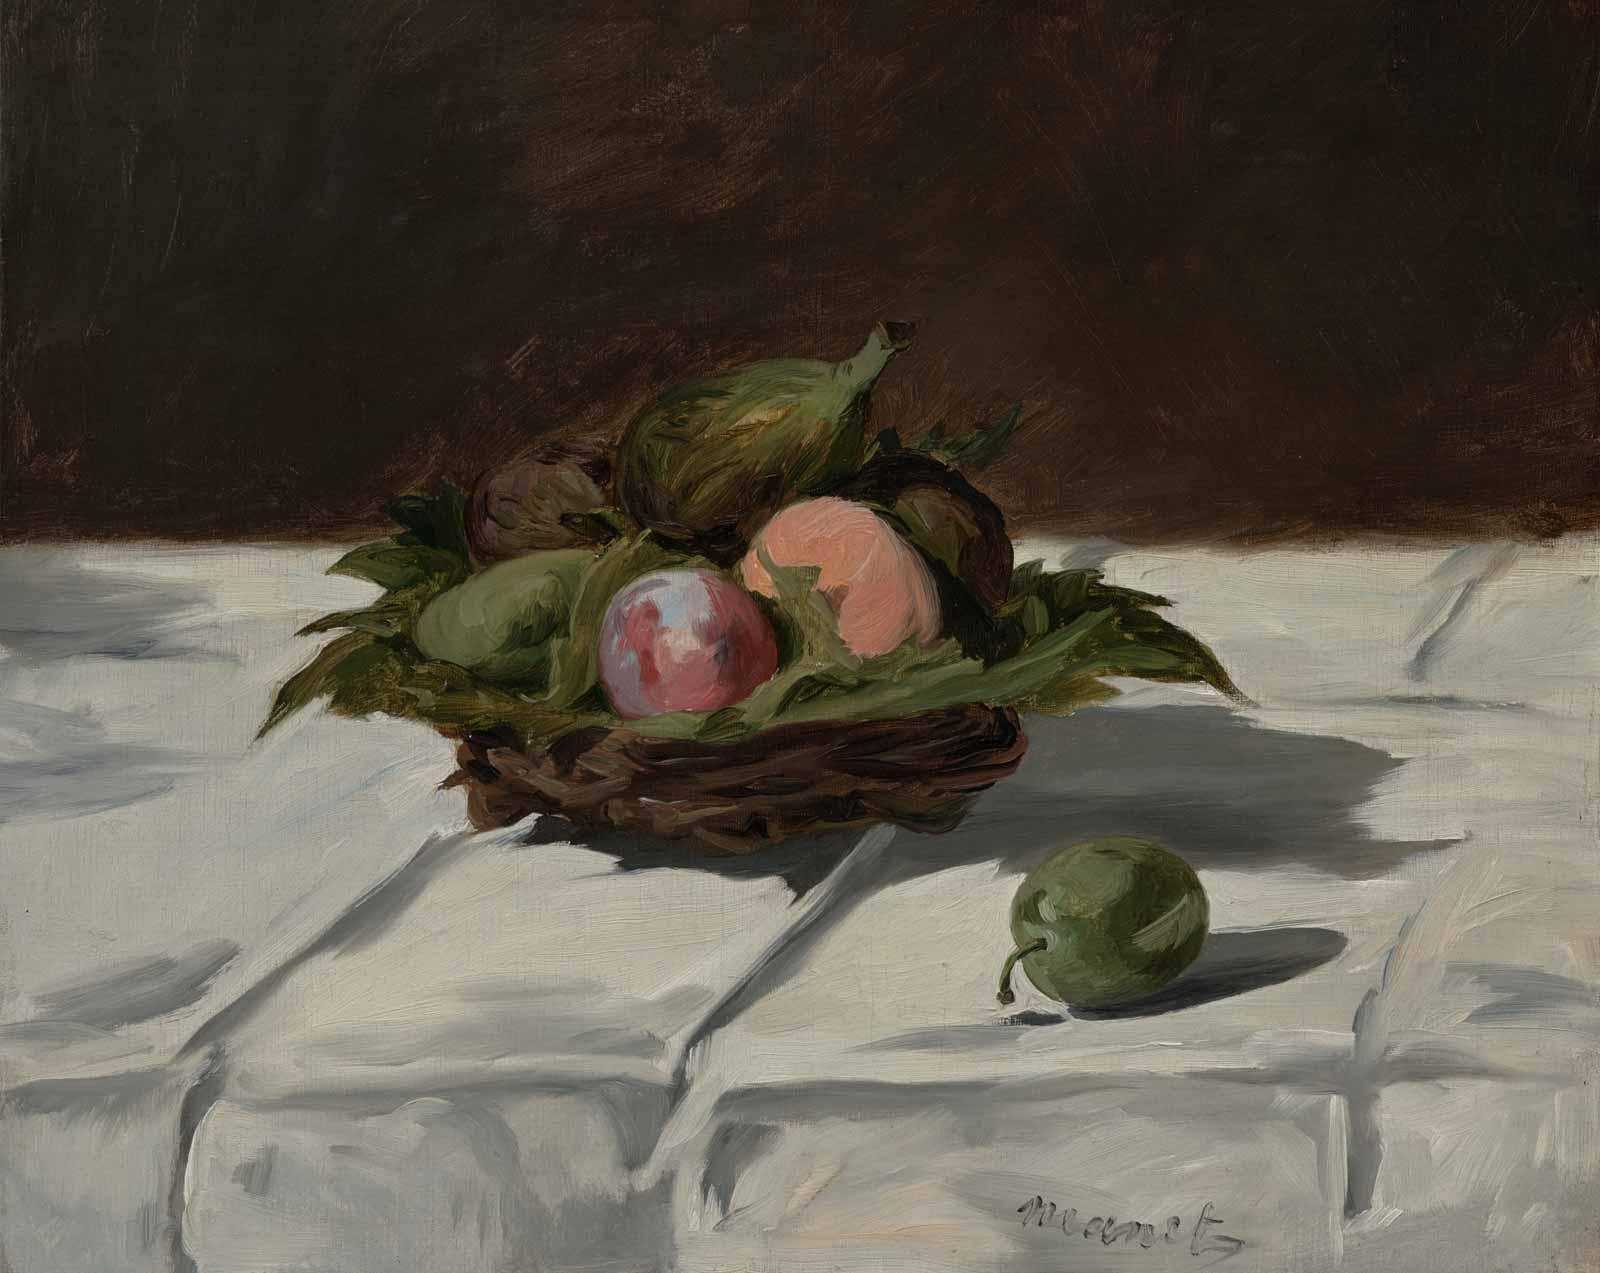 Basket of Fruit, c. 1864, by Édouard Manet.